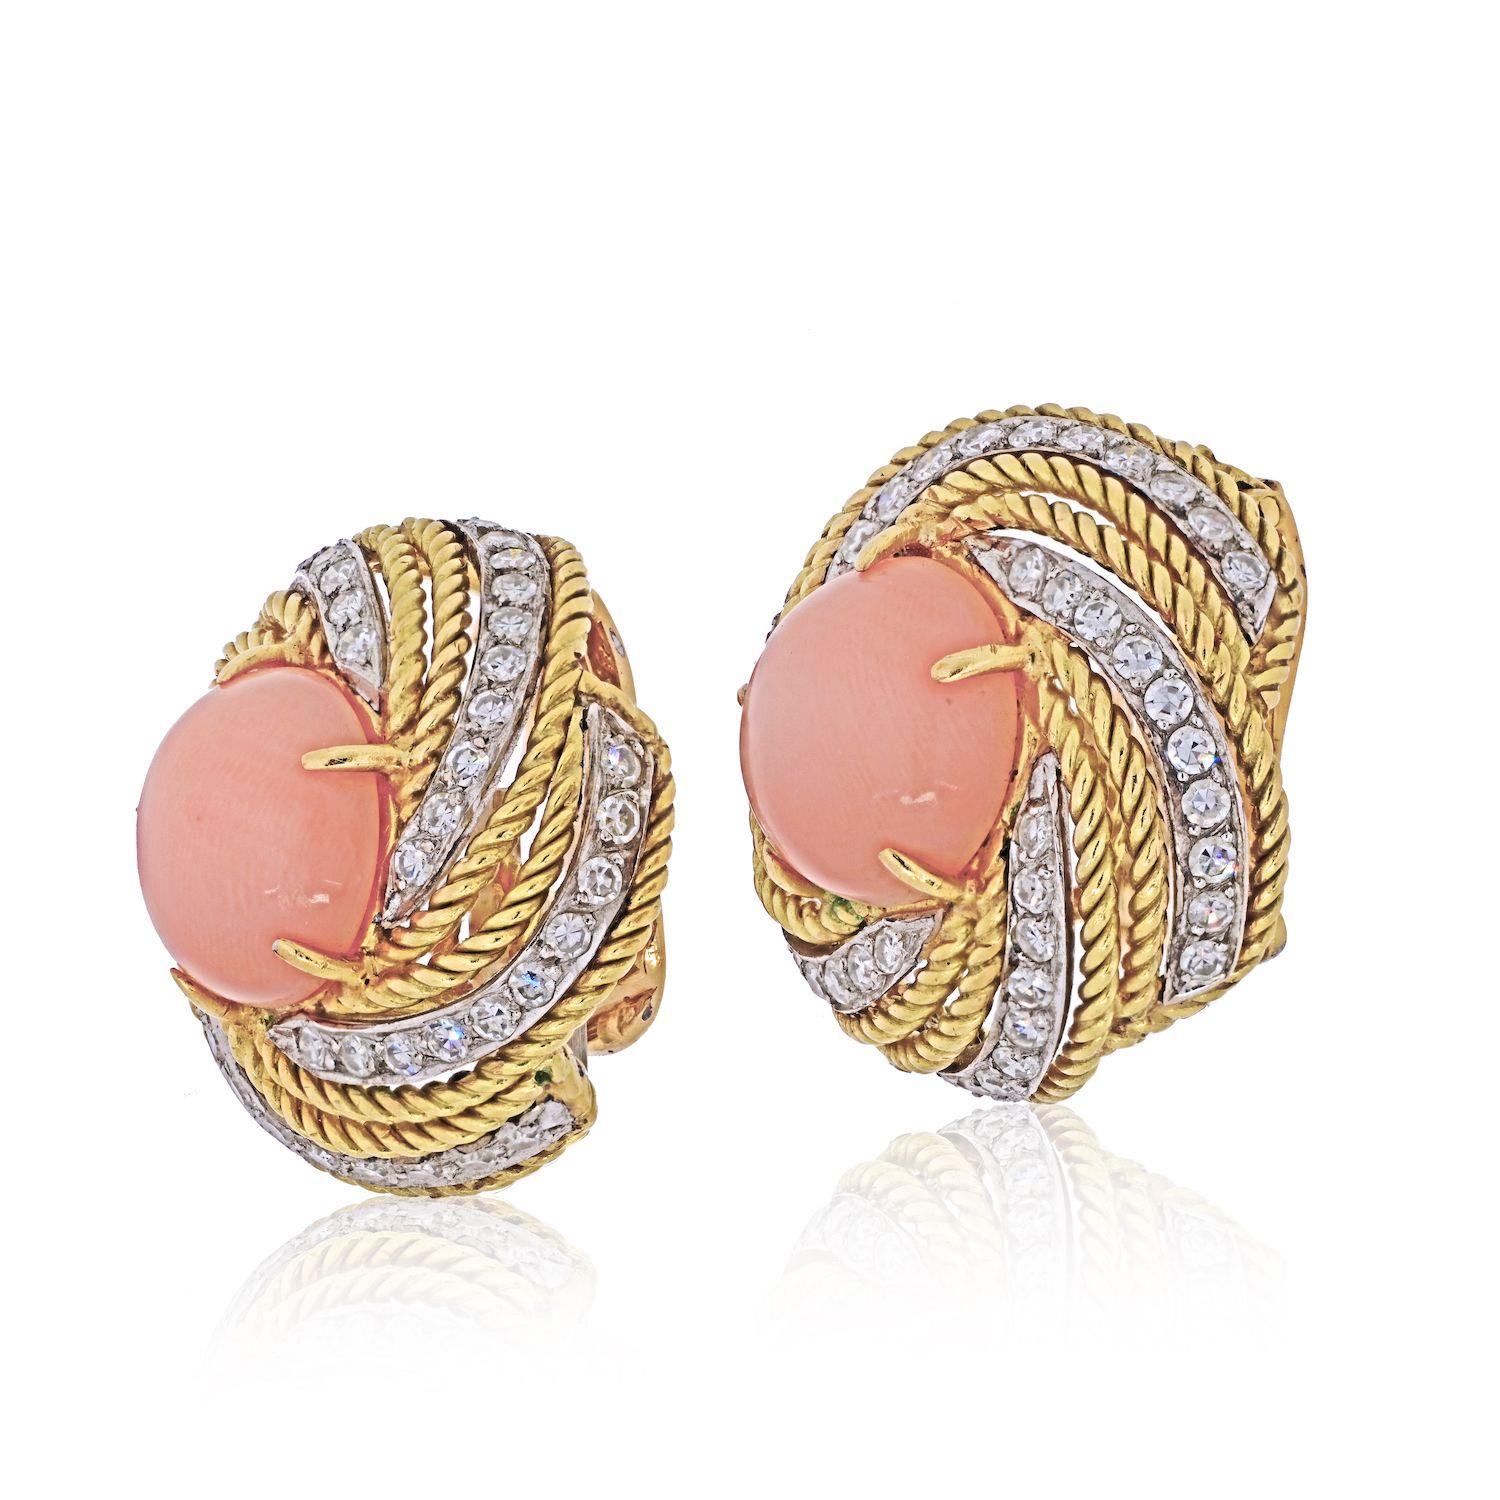 Pair of 18k gold cocktail earrings by Vourakis, with 12mm corals, surrounded with approx. 1.50ctw in diamonds. Earrings are 25mm in diameter. Marked: Vourakis, 750, F73. Weight - 22.8 grams.
Clip on 
